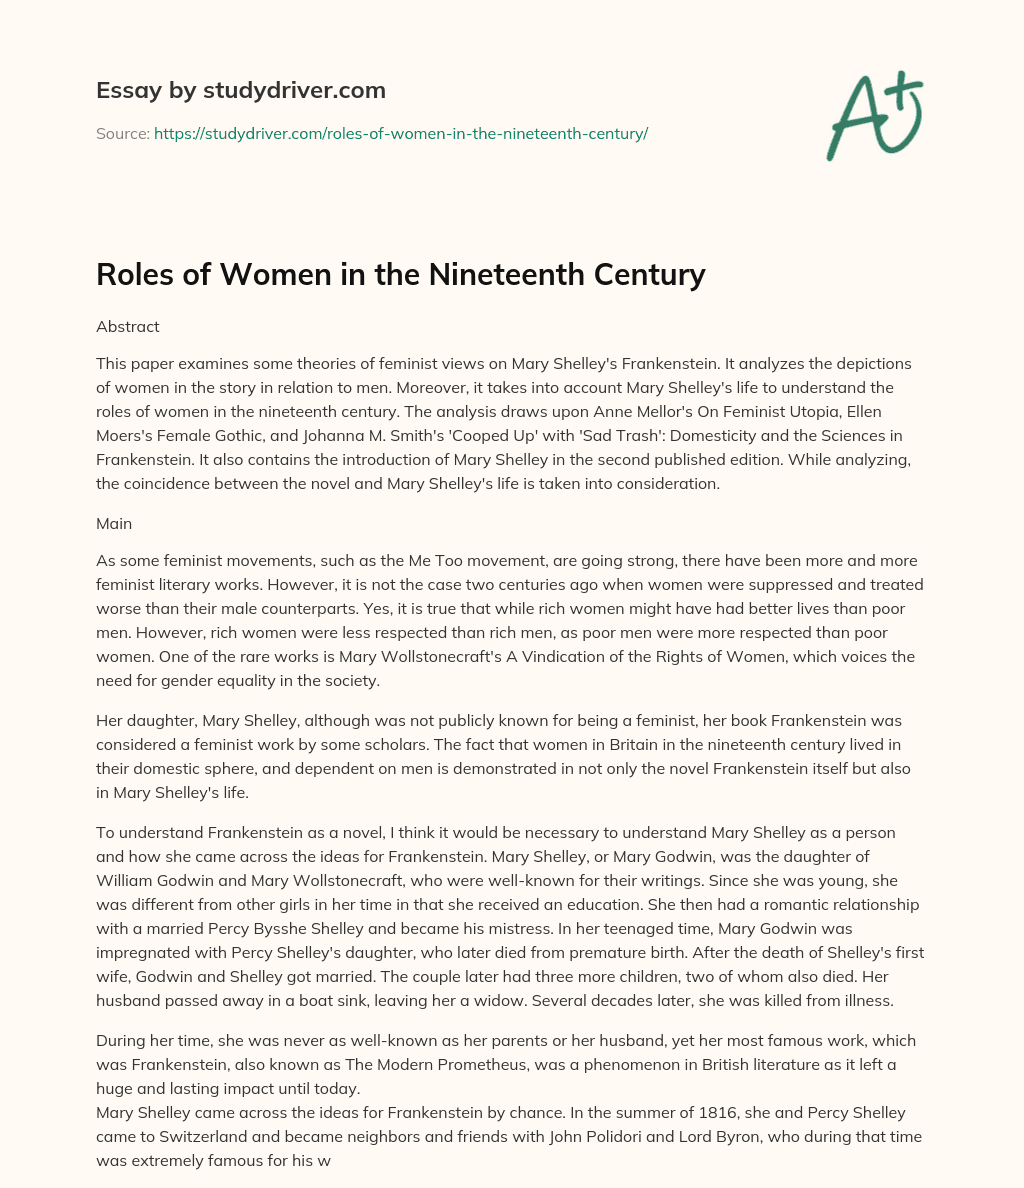 Roles of Women in the Nineteenth Century essay